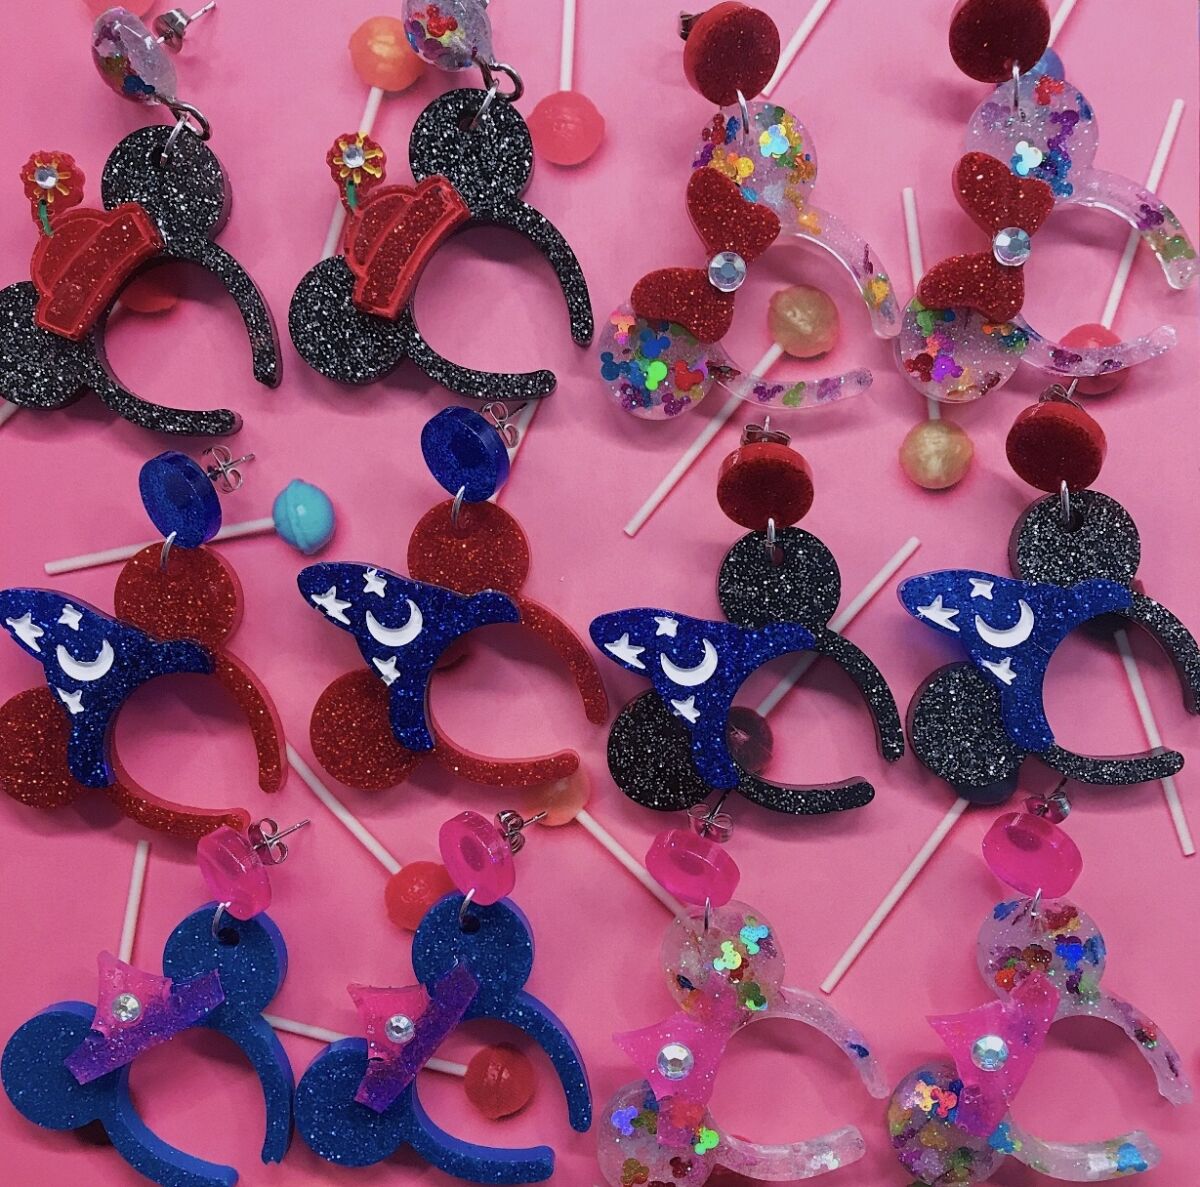 Mickey and Minnie Mouse earrings.